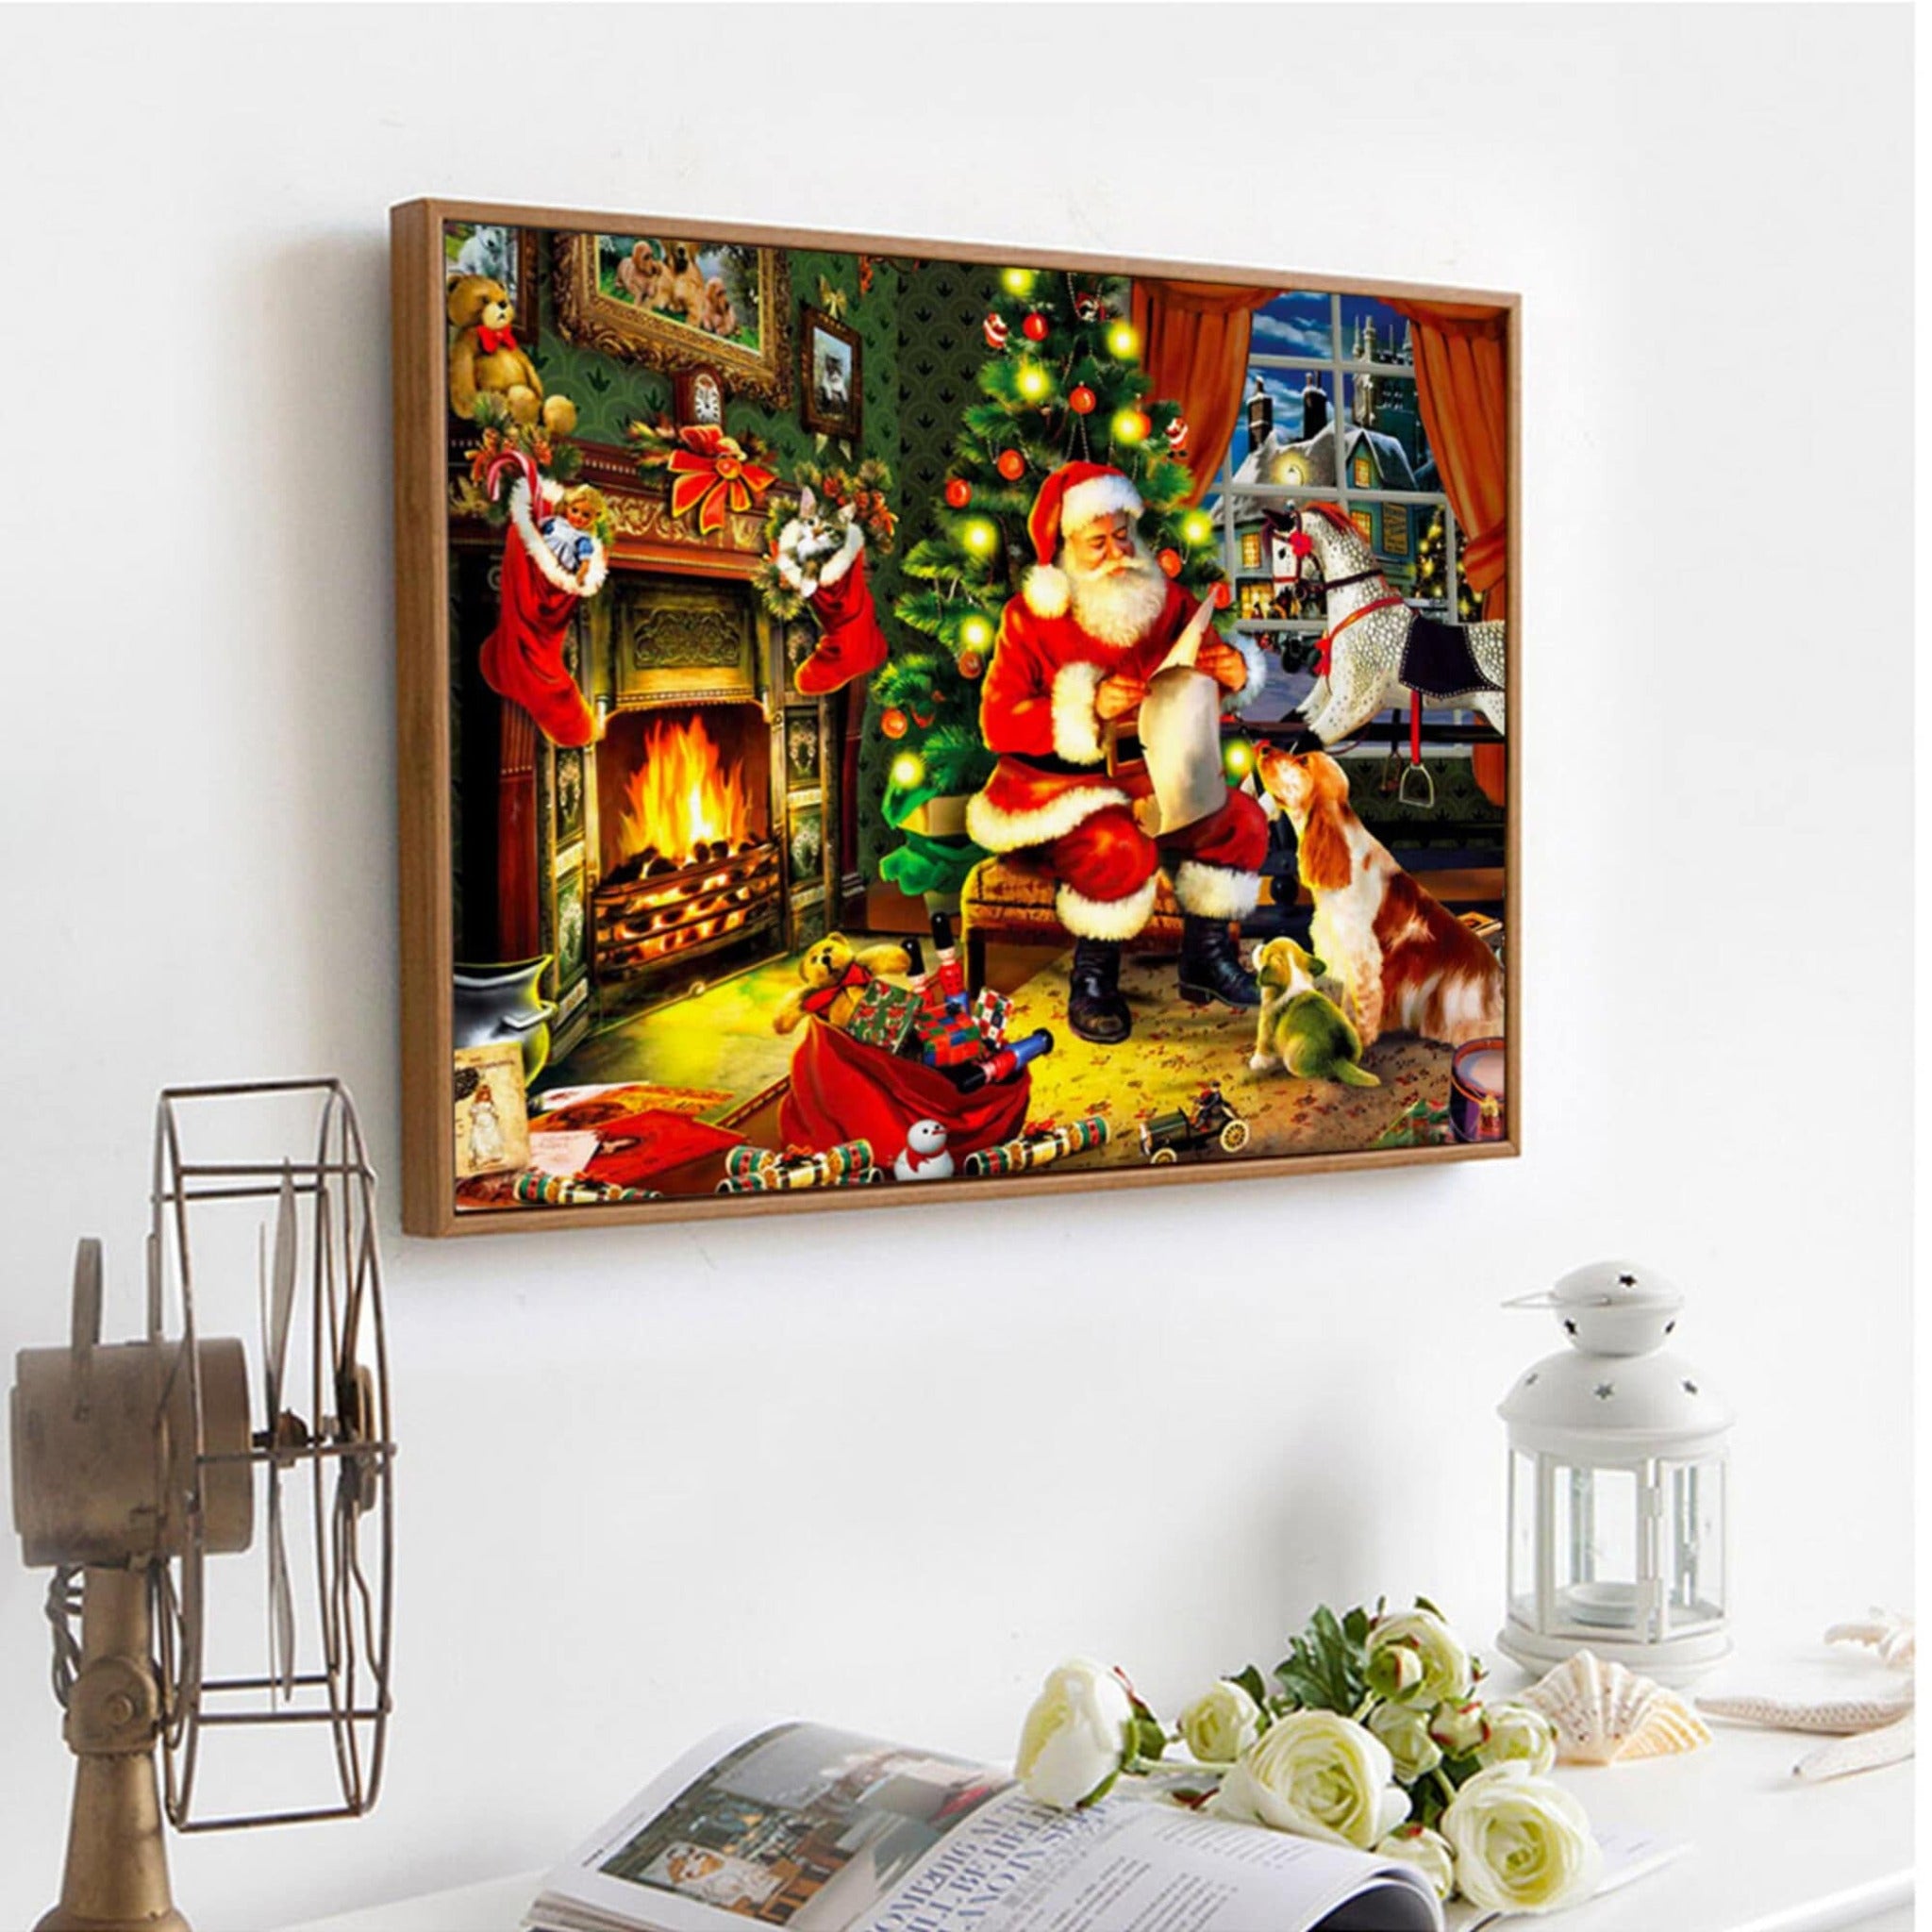 5D Diamond Painting Christmas Candles in the Window Kit